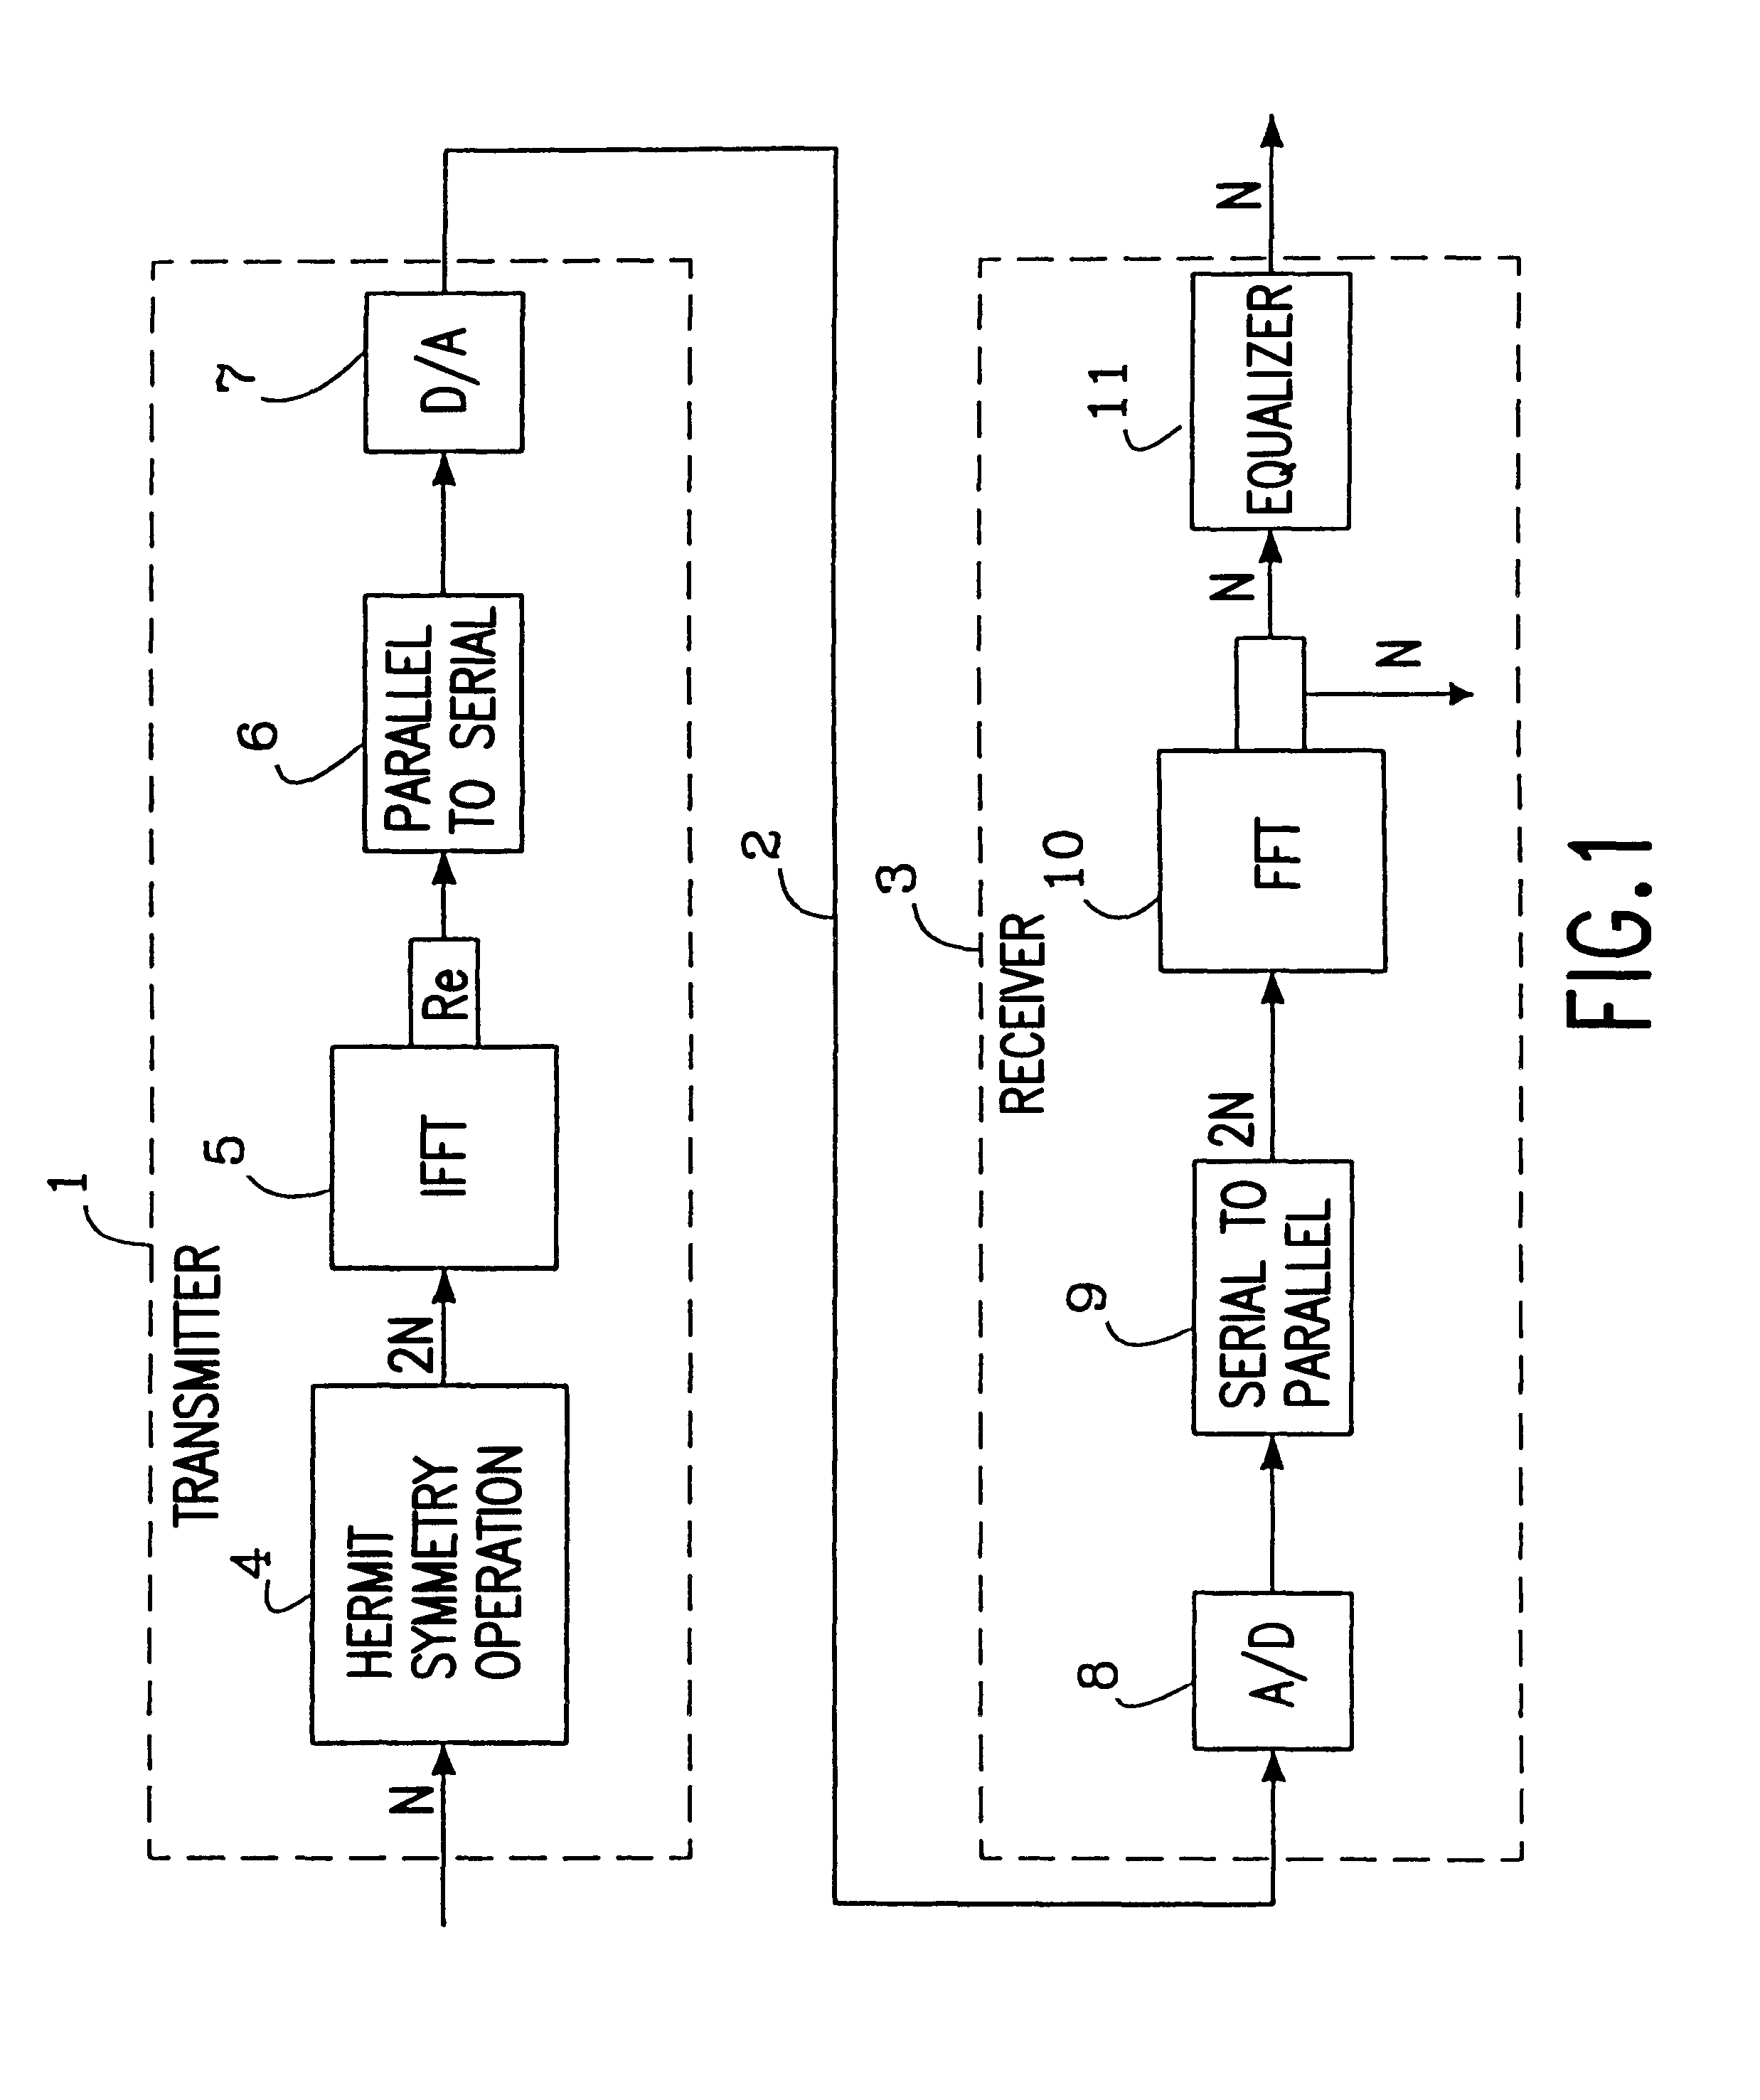 Method and device in a communication system